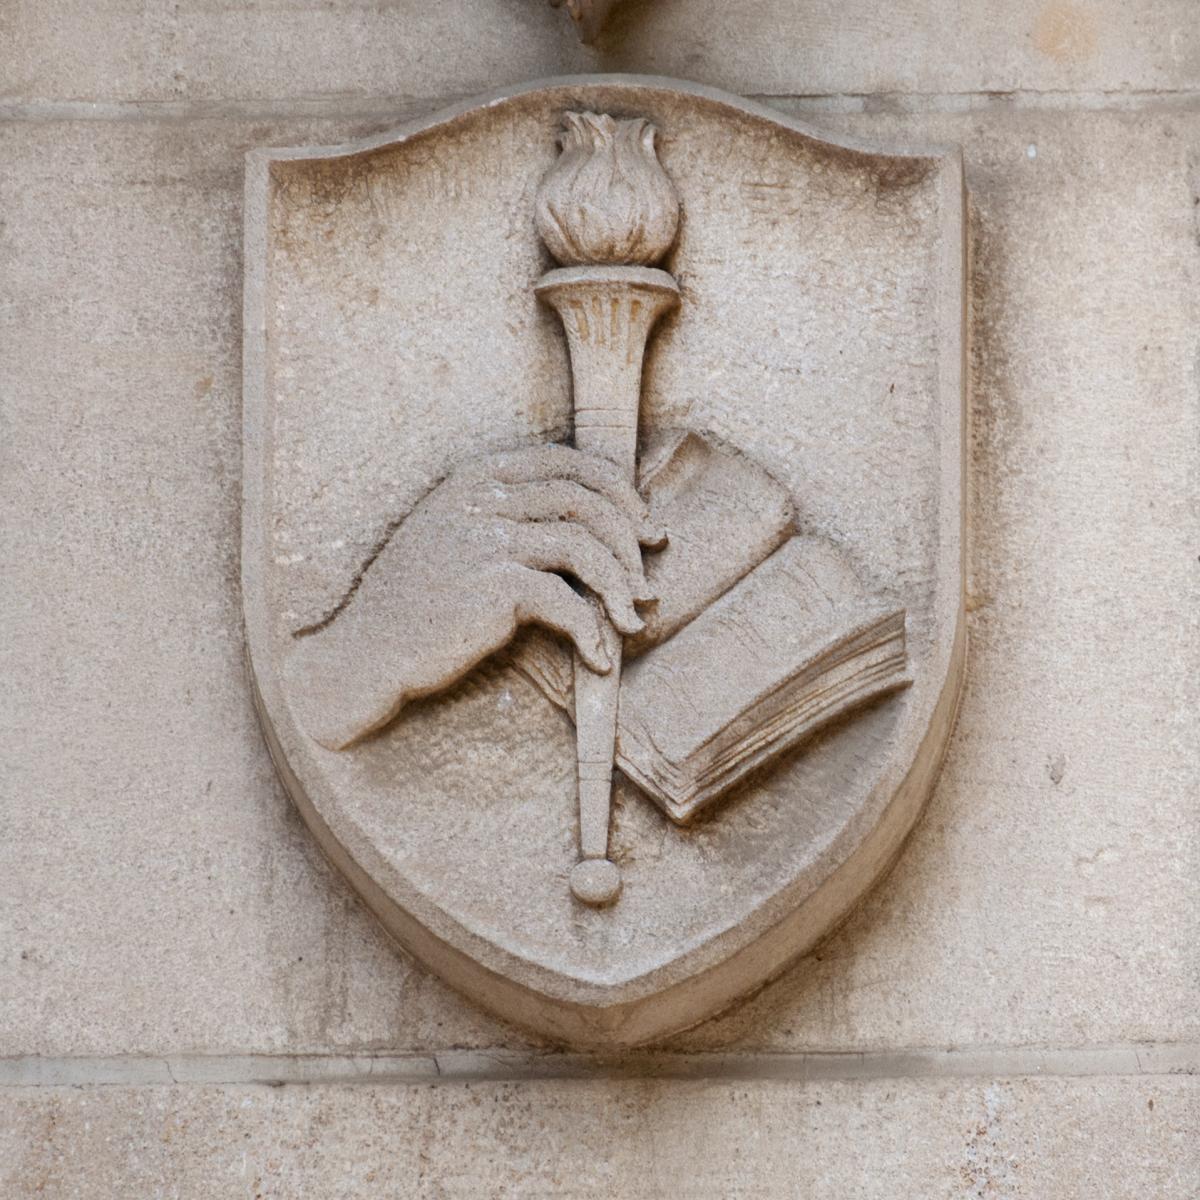 Stone shield from Rubenstein Library building showing an open book and a hand holding a torch